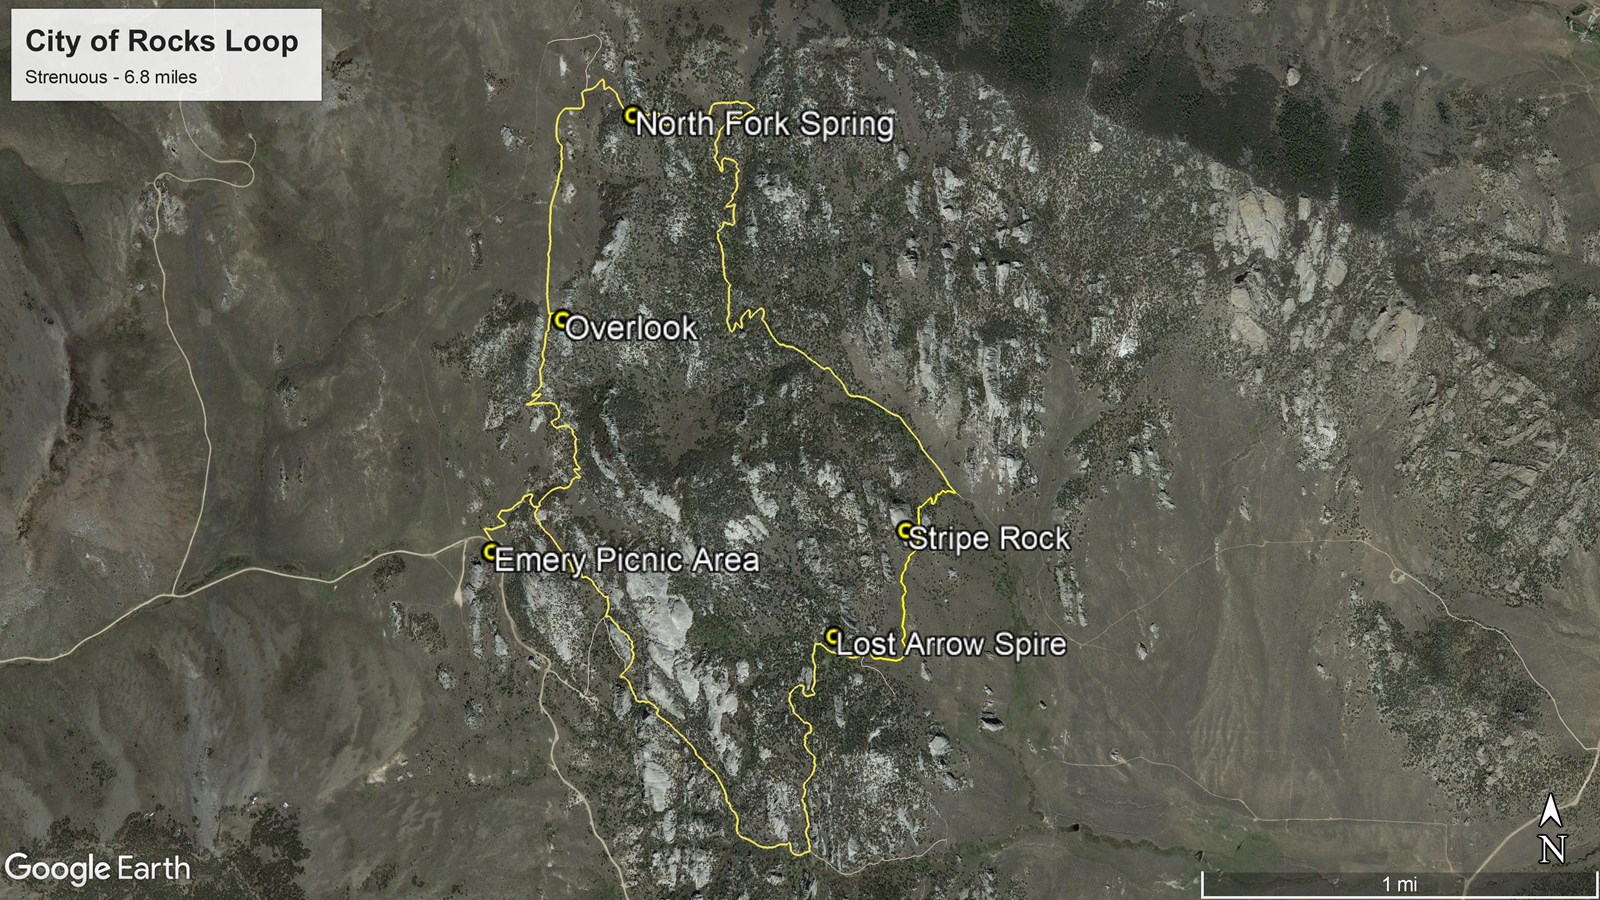 Satellite map highlighting the City of Rocks Loop route winding among granite formations.